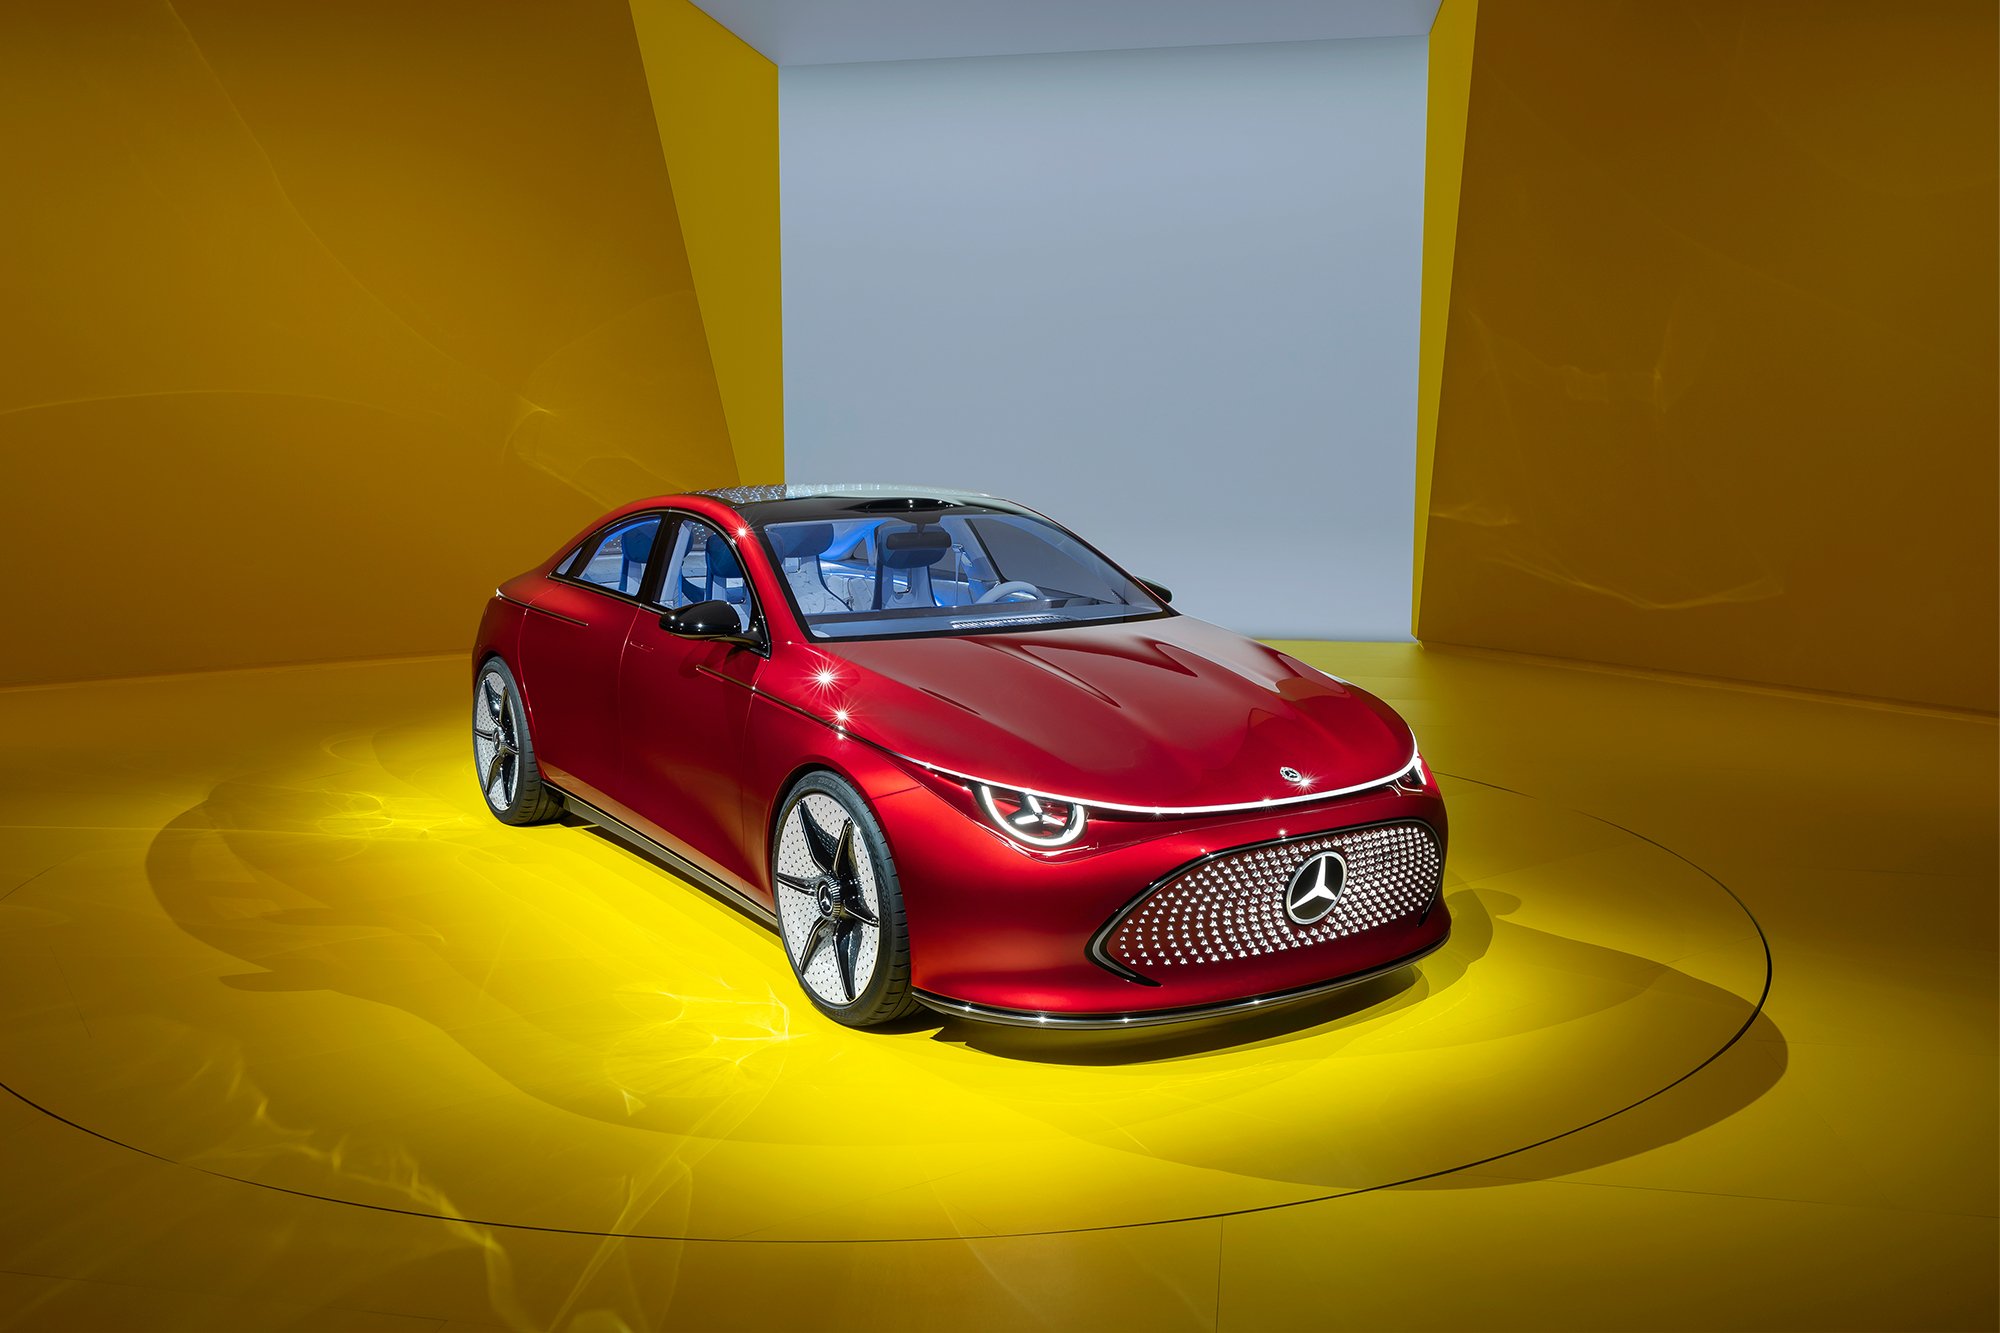  The sleek proportions and elongated bonnet of the Mercedes-Benz Concept CLA